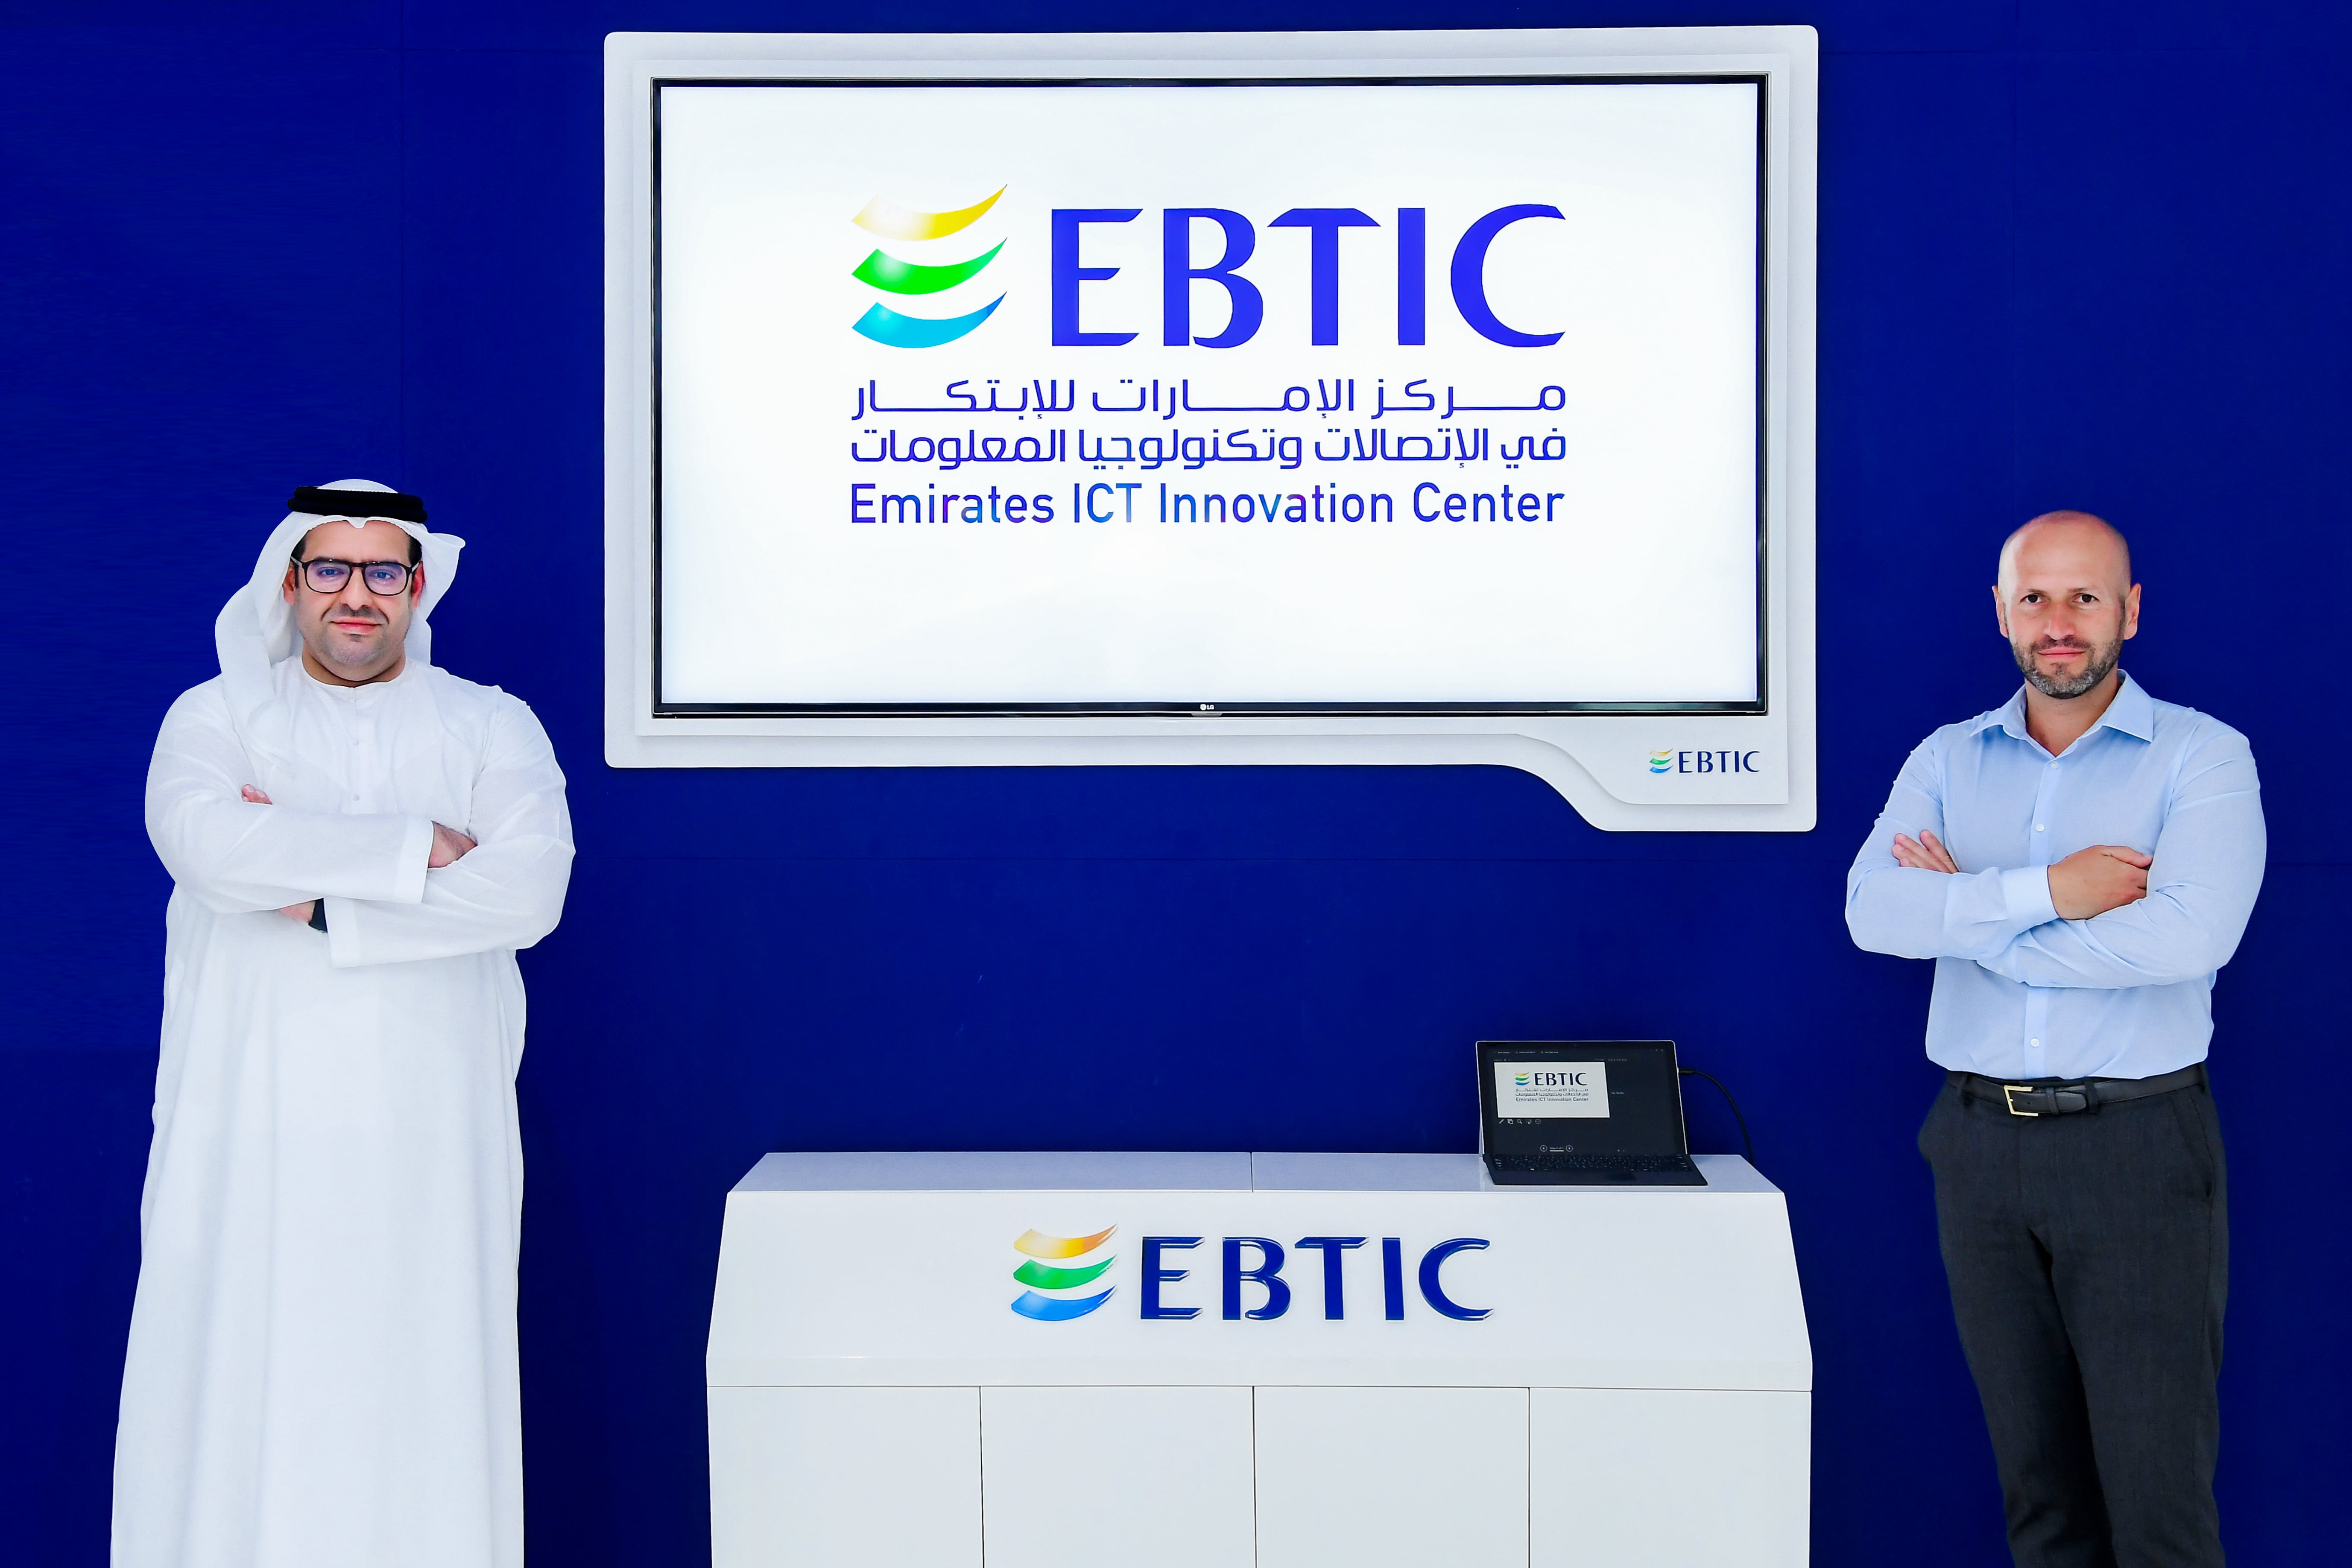 Team from EBTIC at Khalifa University Wins Top Honors at FedCSIS 2022 Data Mining Competition for Solution to Predict Costs in Freight Forwarding Contracts